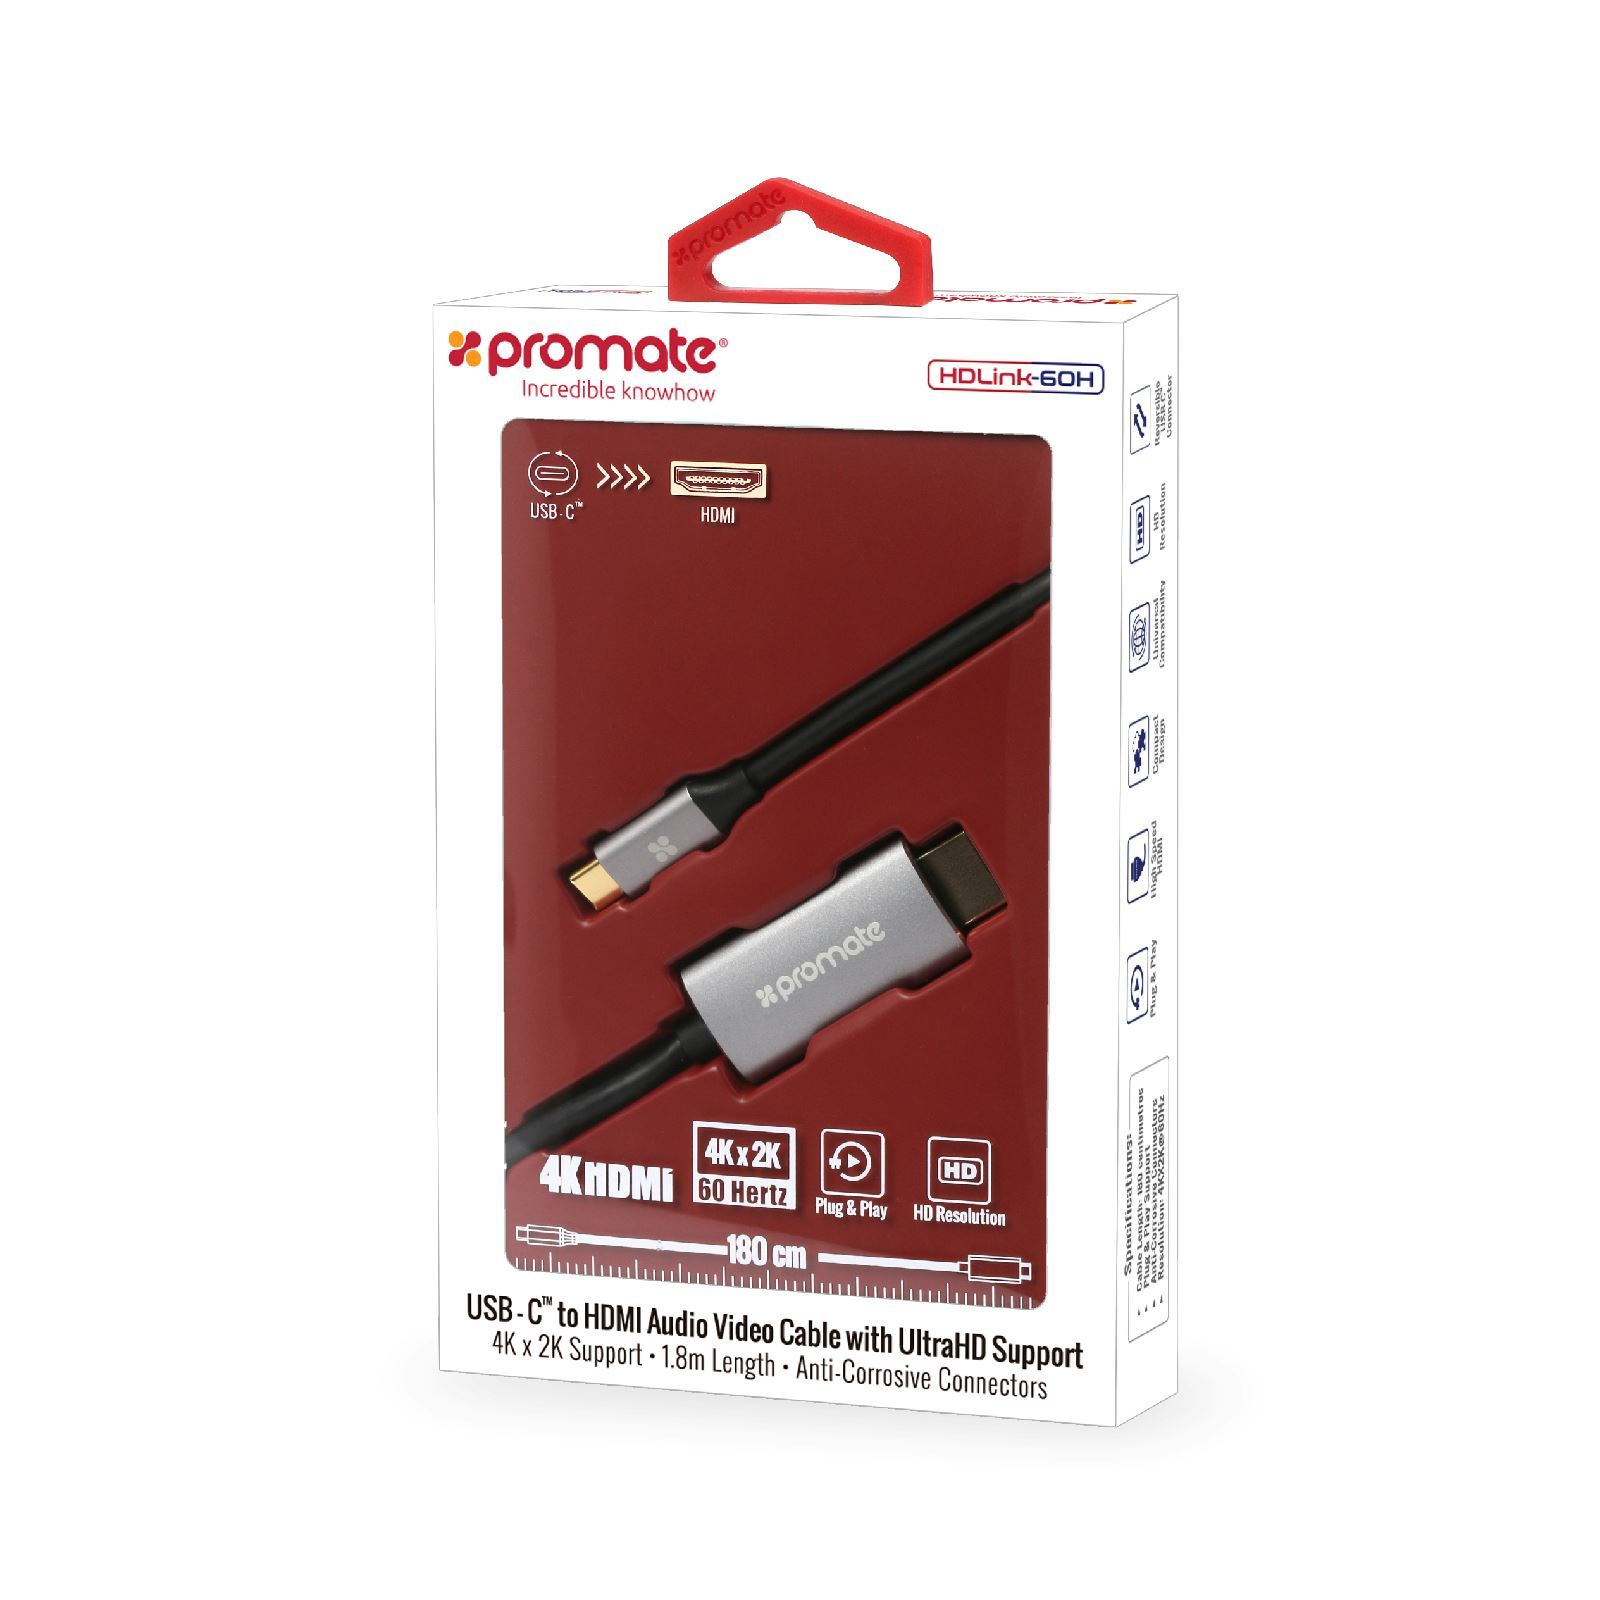 Vågn op Forstad Lige Buy the Promate HDLINK-60H 1.8m 4K USB-C to HDMI Cable with Gold Plated...  ( HDLINK-60H.GRY ) online - PBTech.com/au